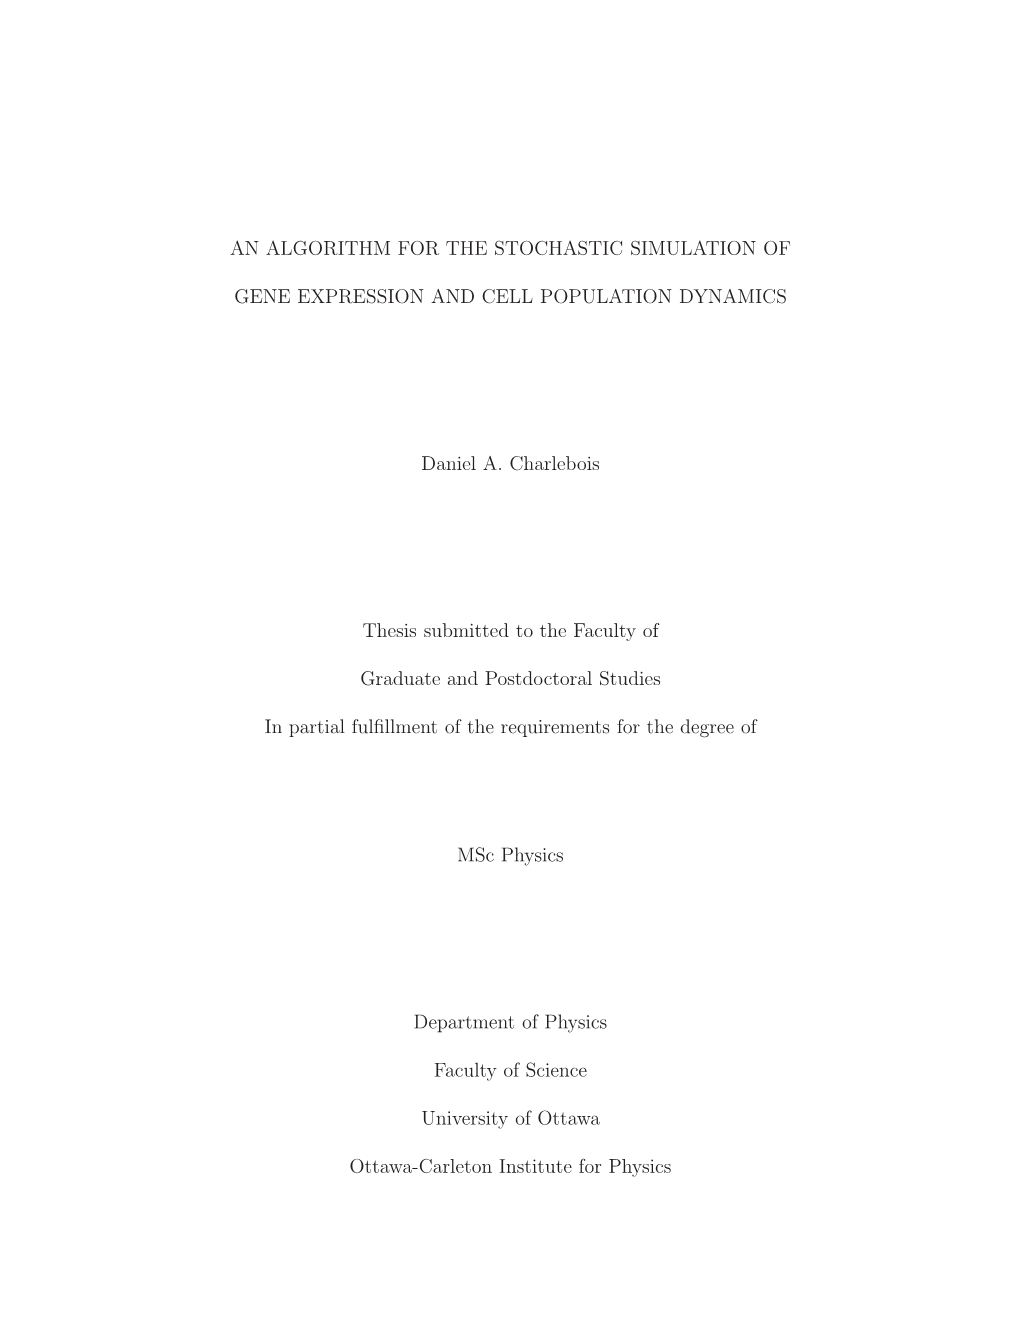 AN ALGORITHM for the STOCHASTIC SIMULATION of GENE EXPRESSION and CELL POPULATION DYNAMICS Daniel A. Charlebois Thesis Submitted